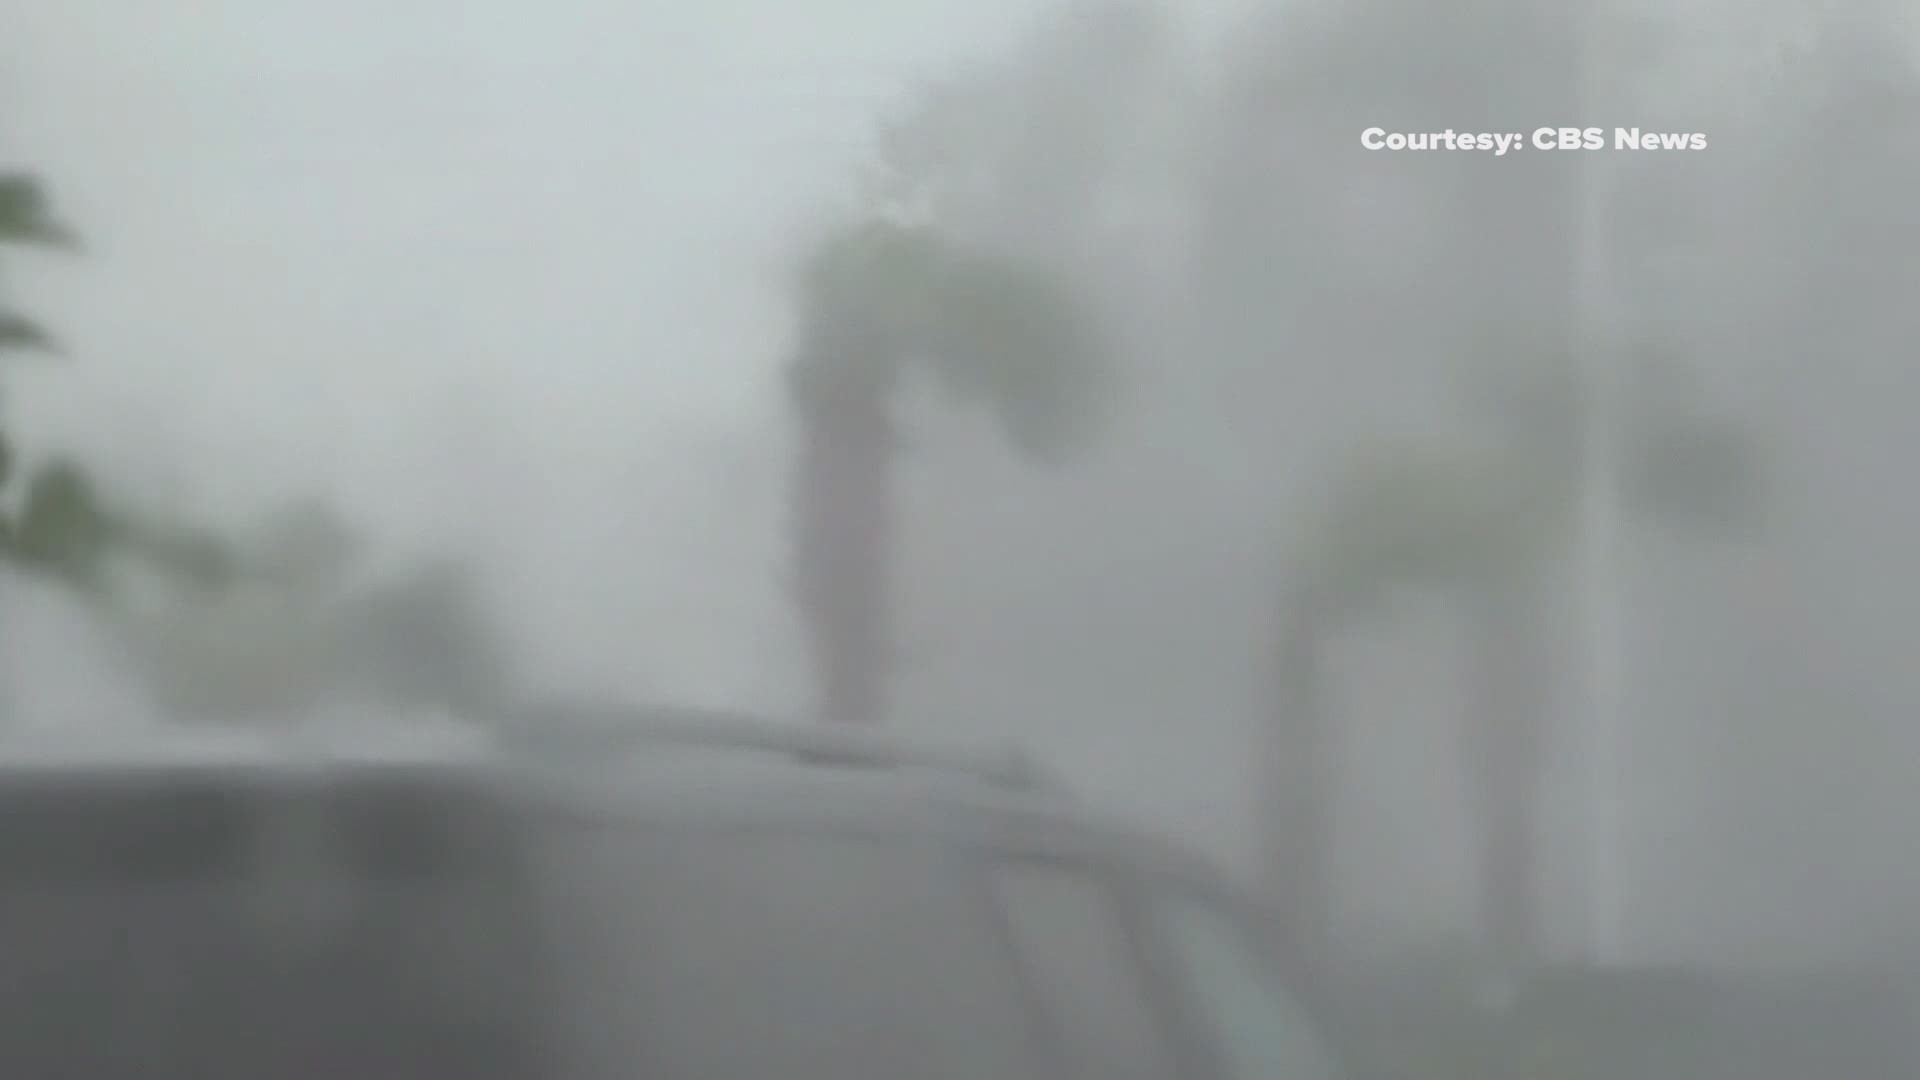 Hurricane Michael has made landfall with 155 mile an hour winds.The effect of the monster storm was felt along Panama City Beach on Wednesday (10/10).